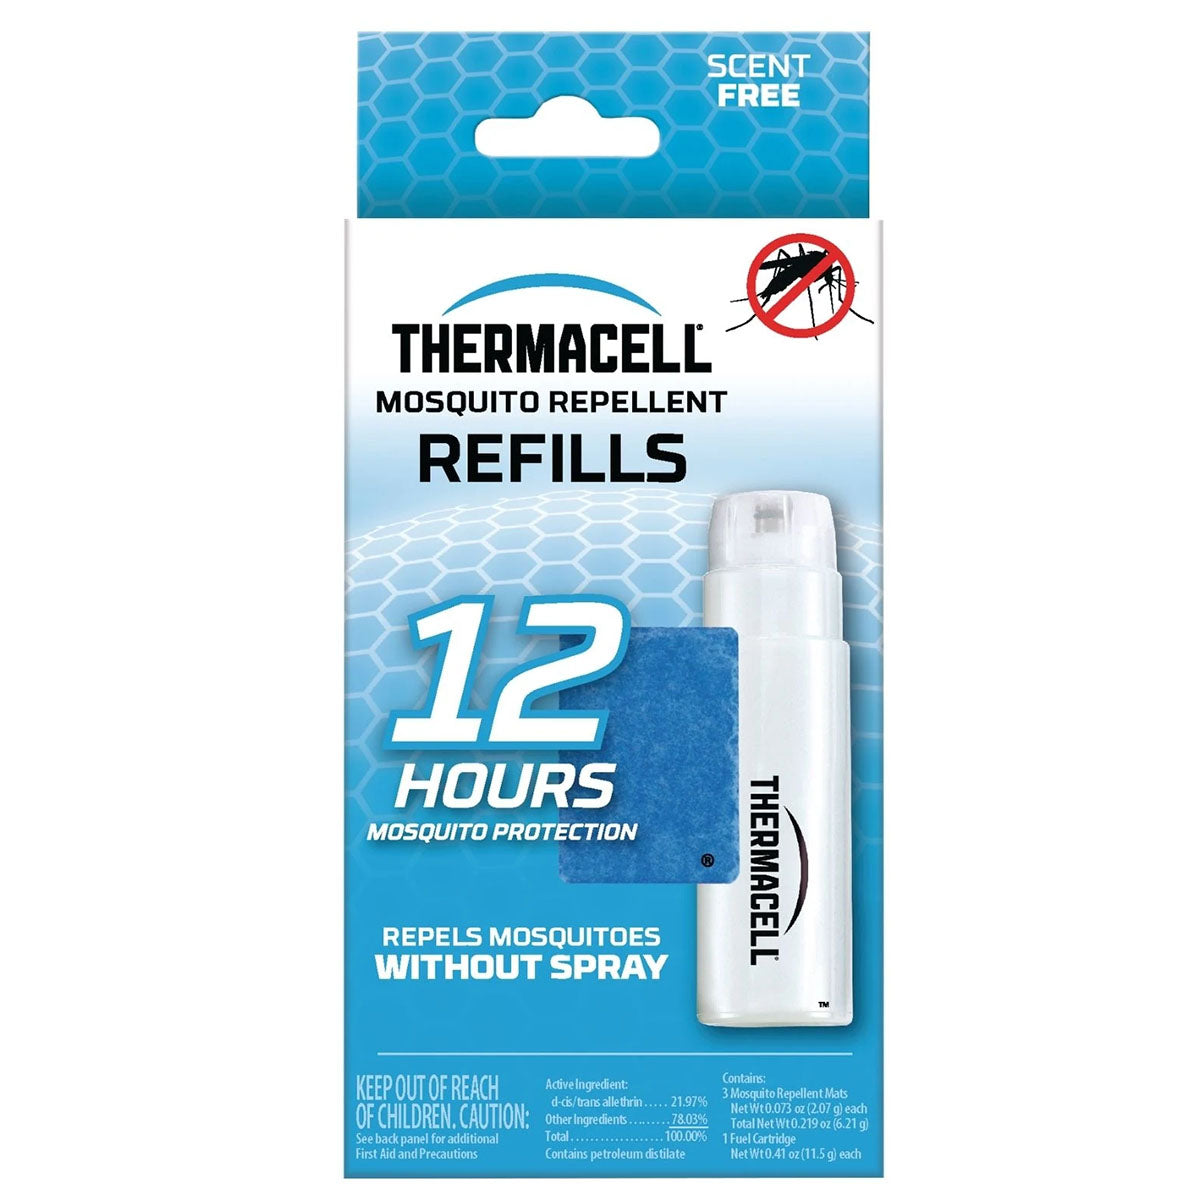 Thermacell Mosquito Repellent Refill - 12 Hours Thermacell Indigo Pool Patio BBQ